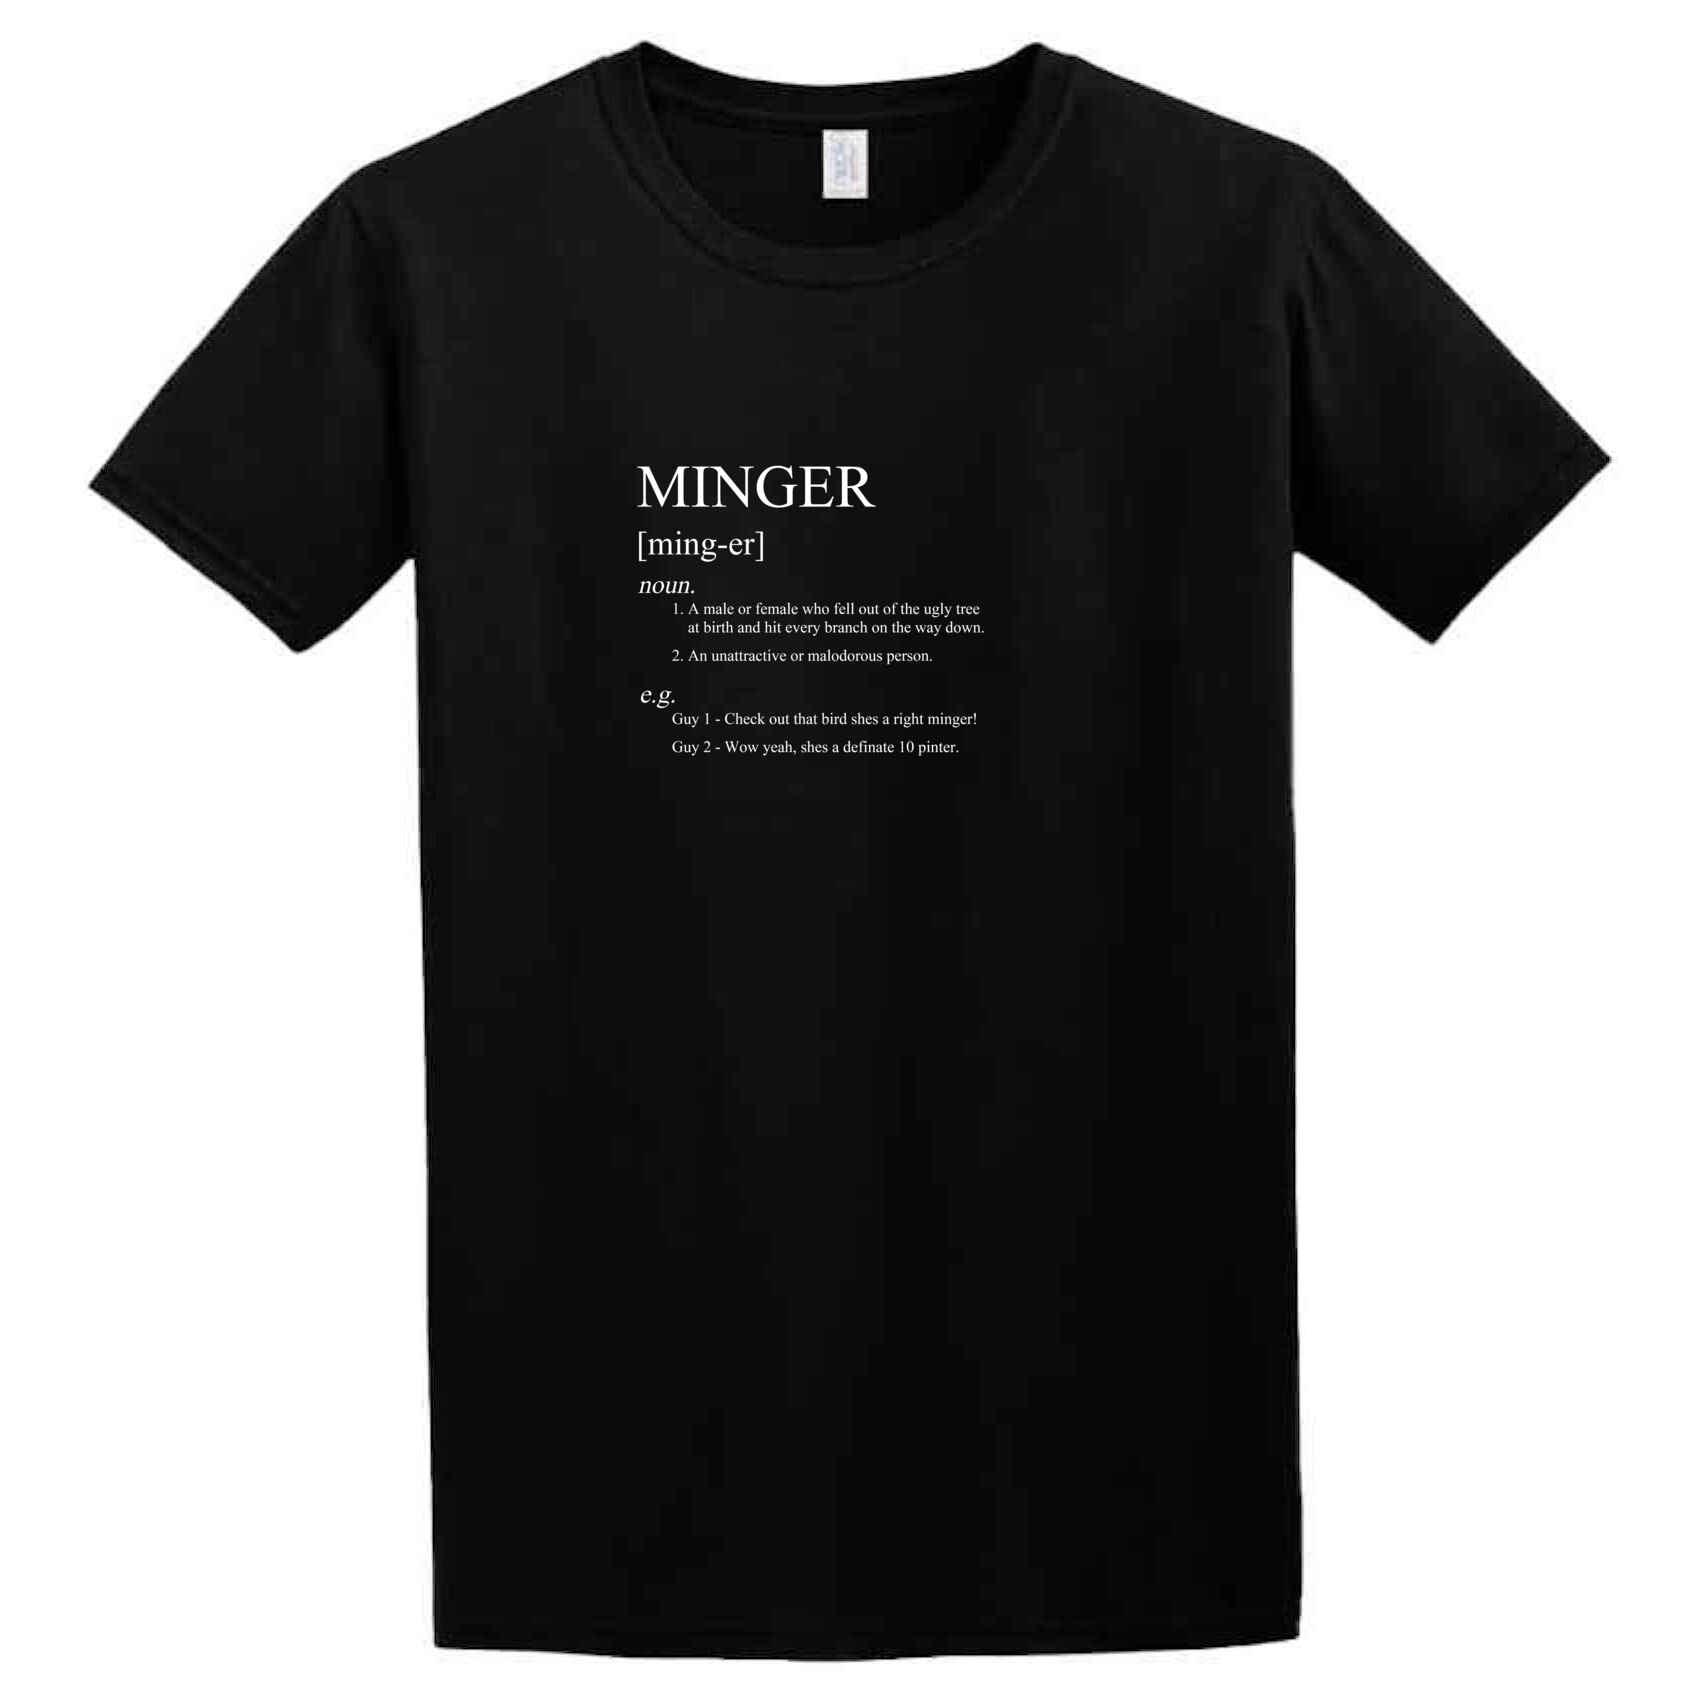 A black Minger T-Shirt that says Twisted Gifts.